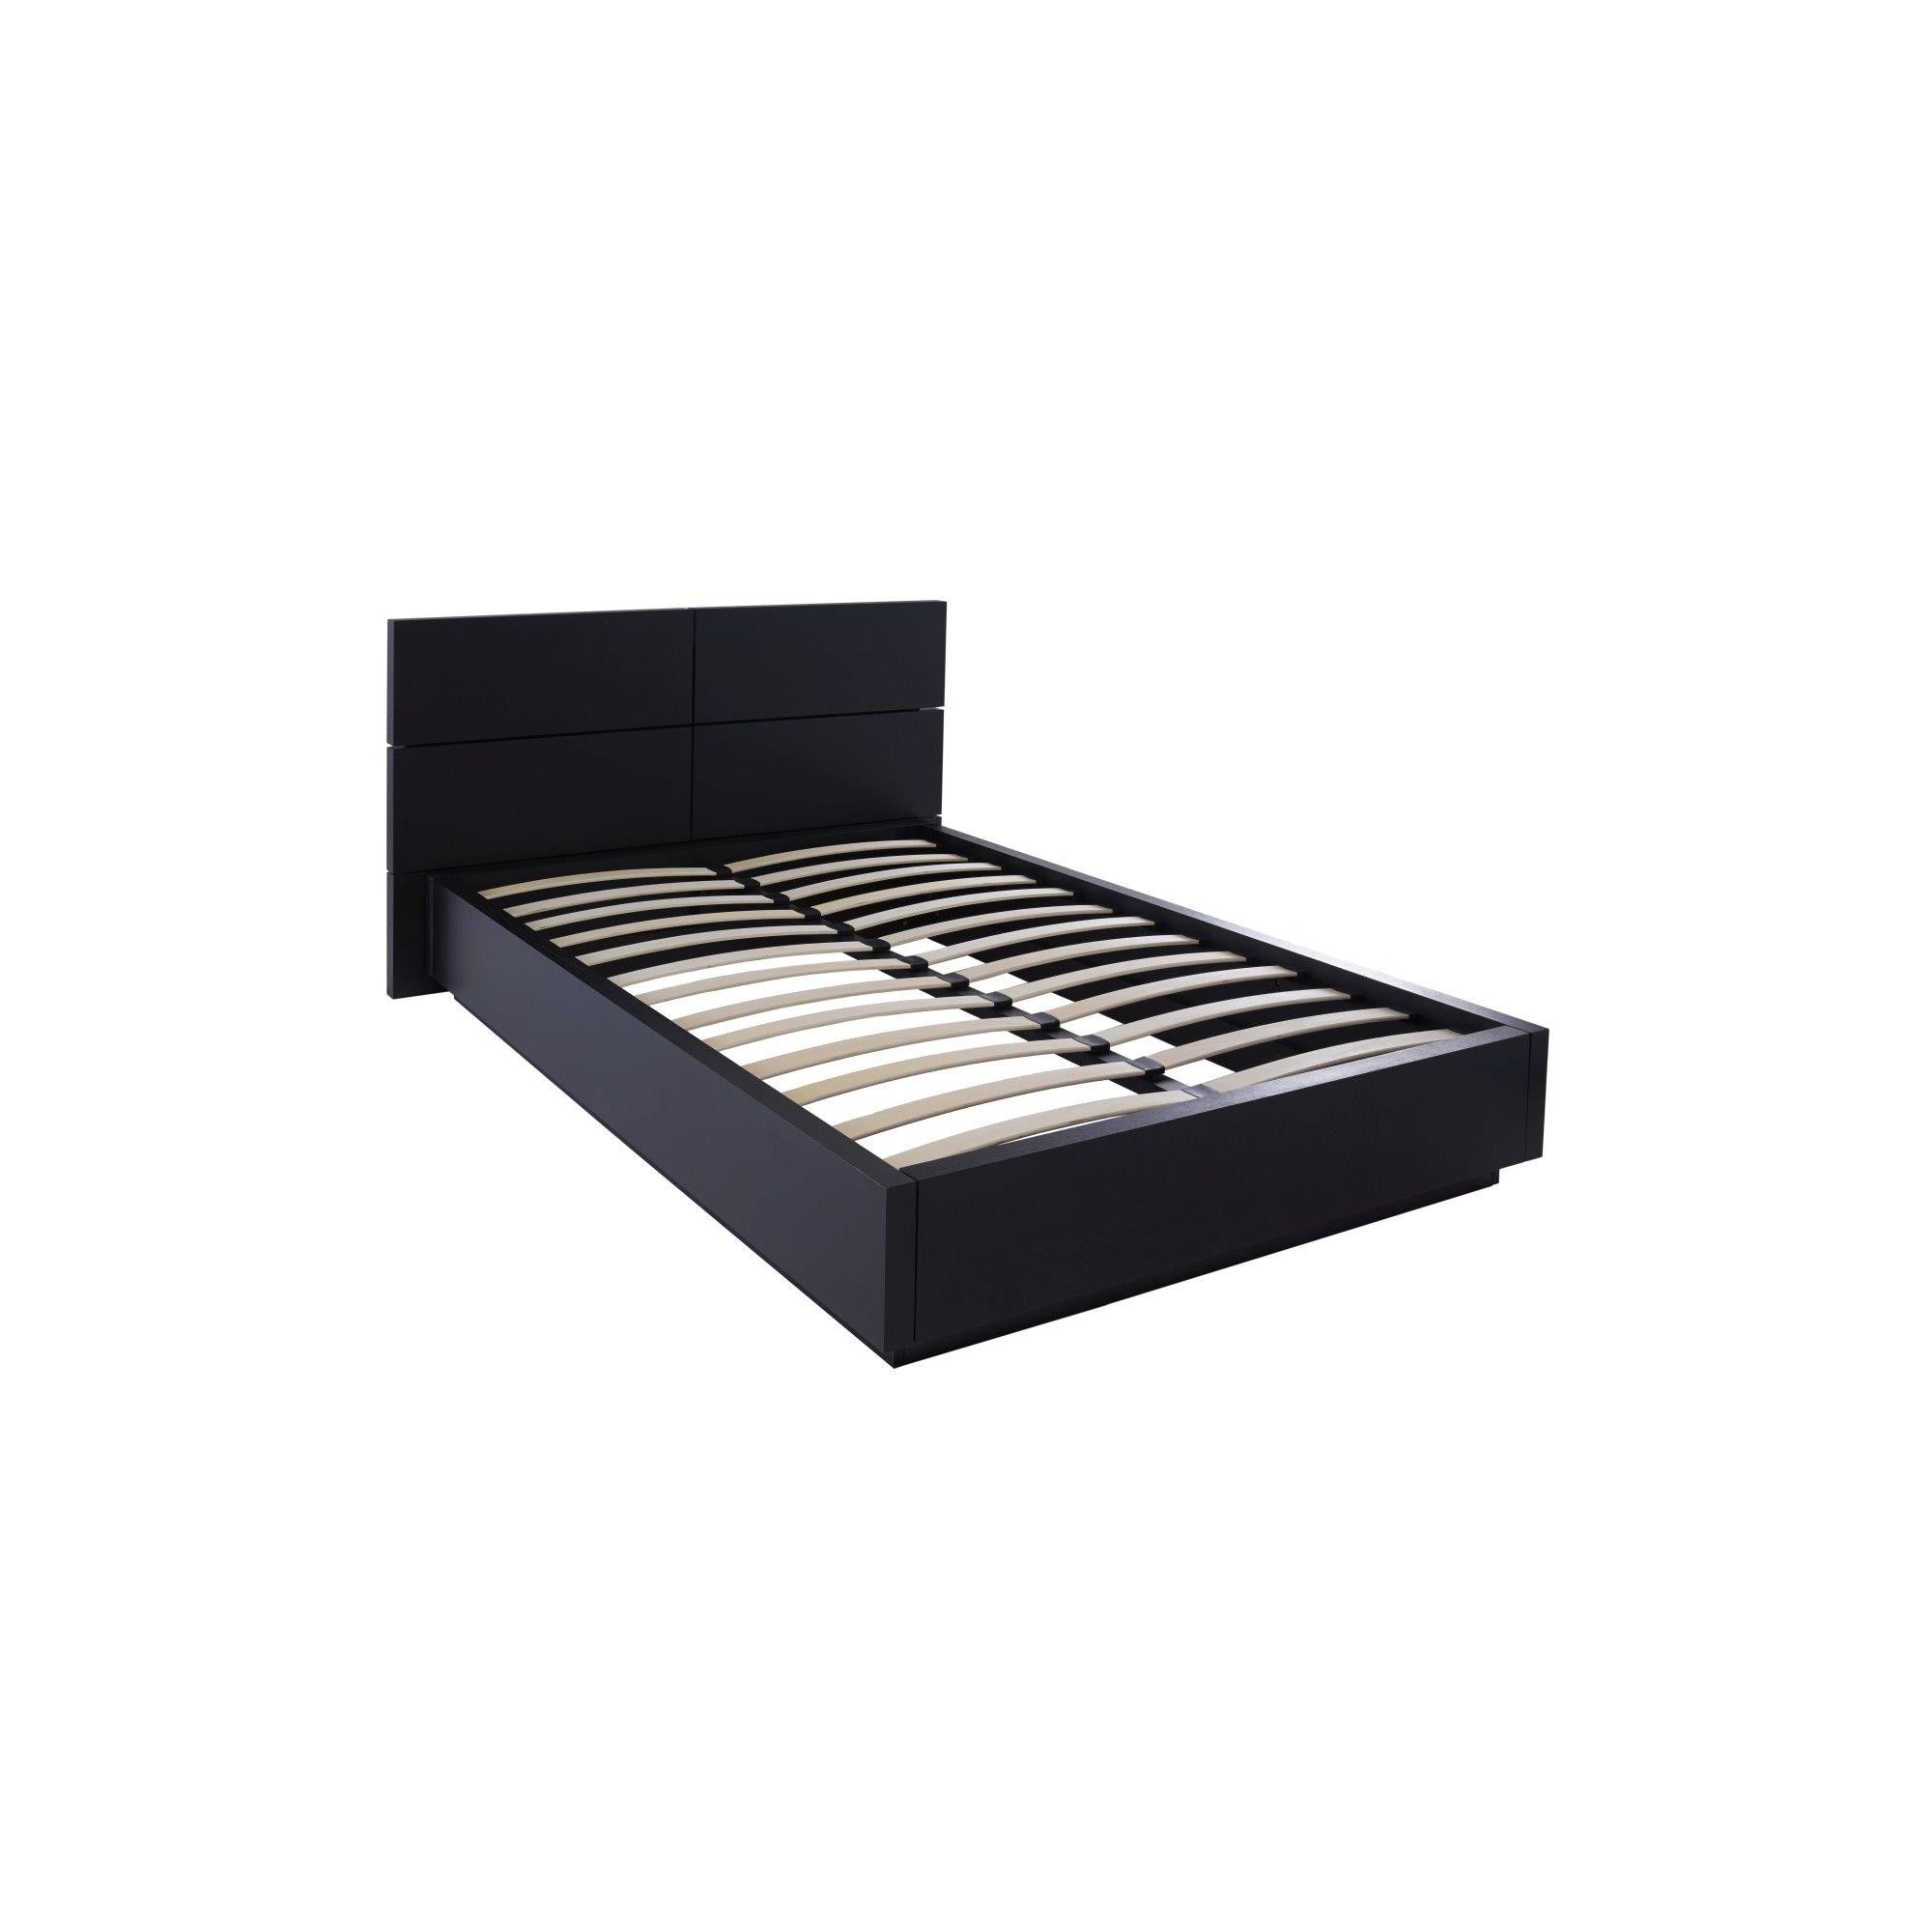 Gillmore Space Cordoba Bed - Double at Tescos Direct